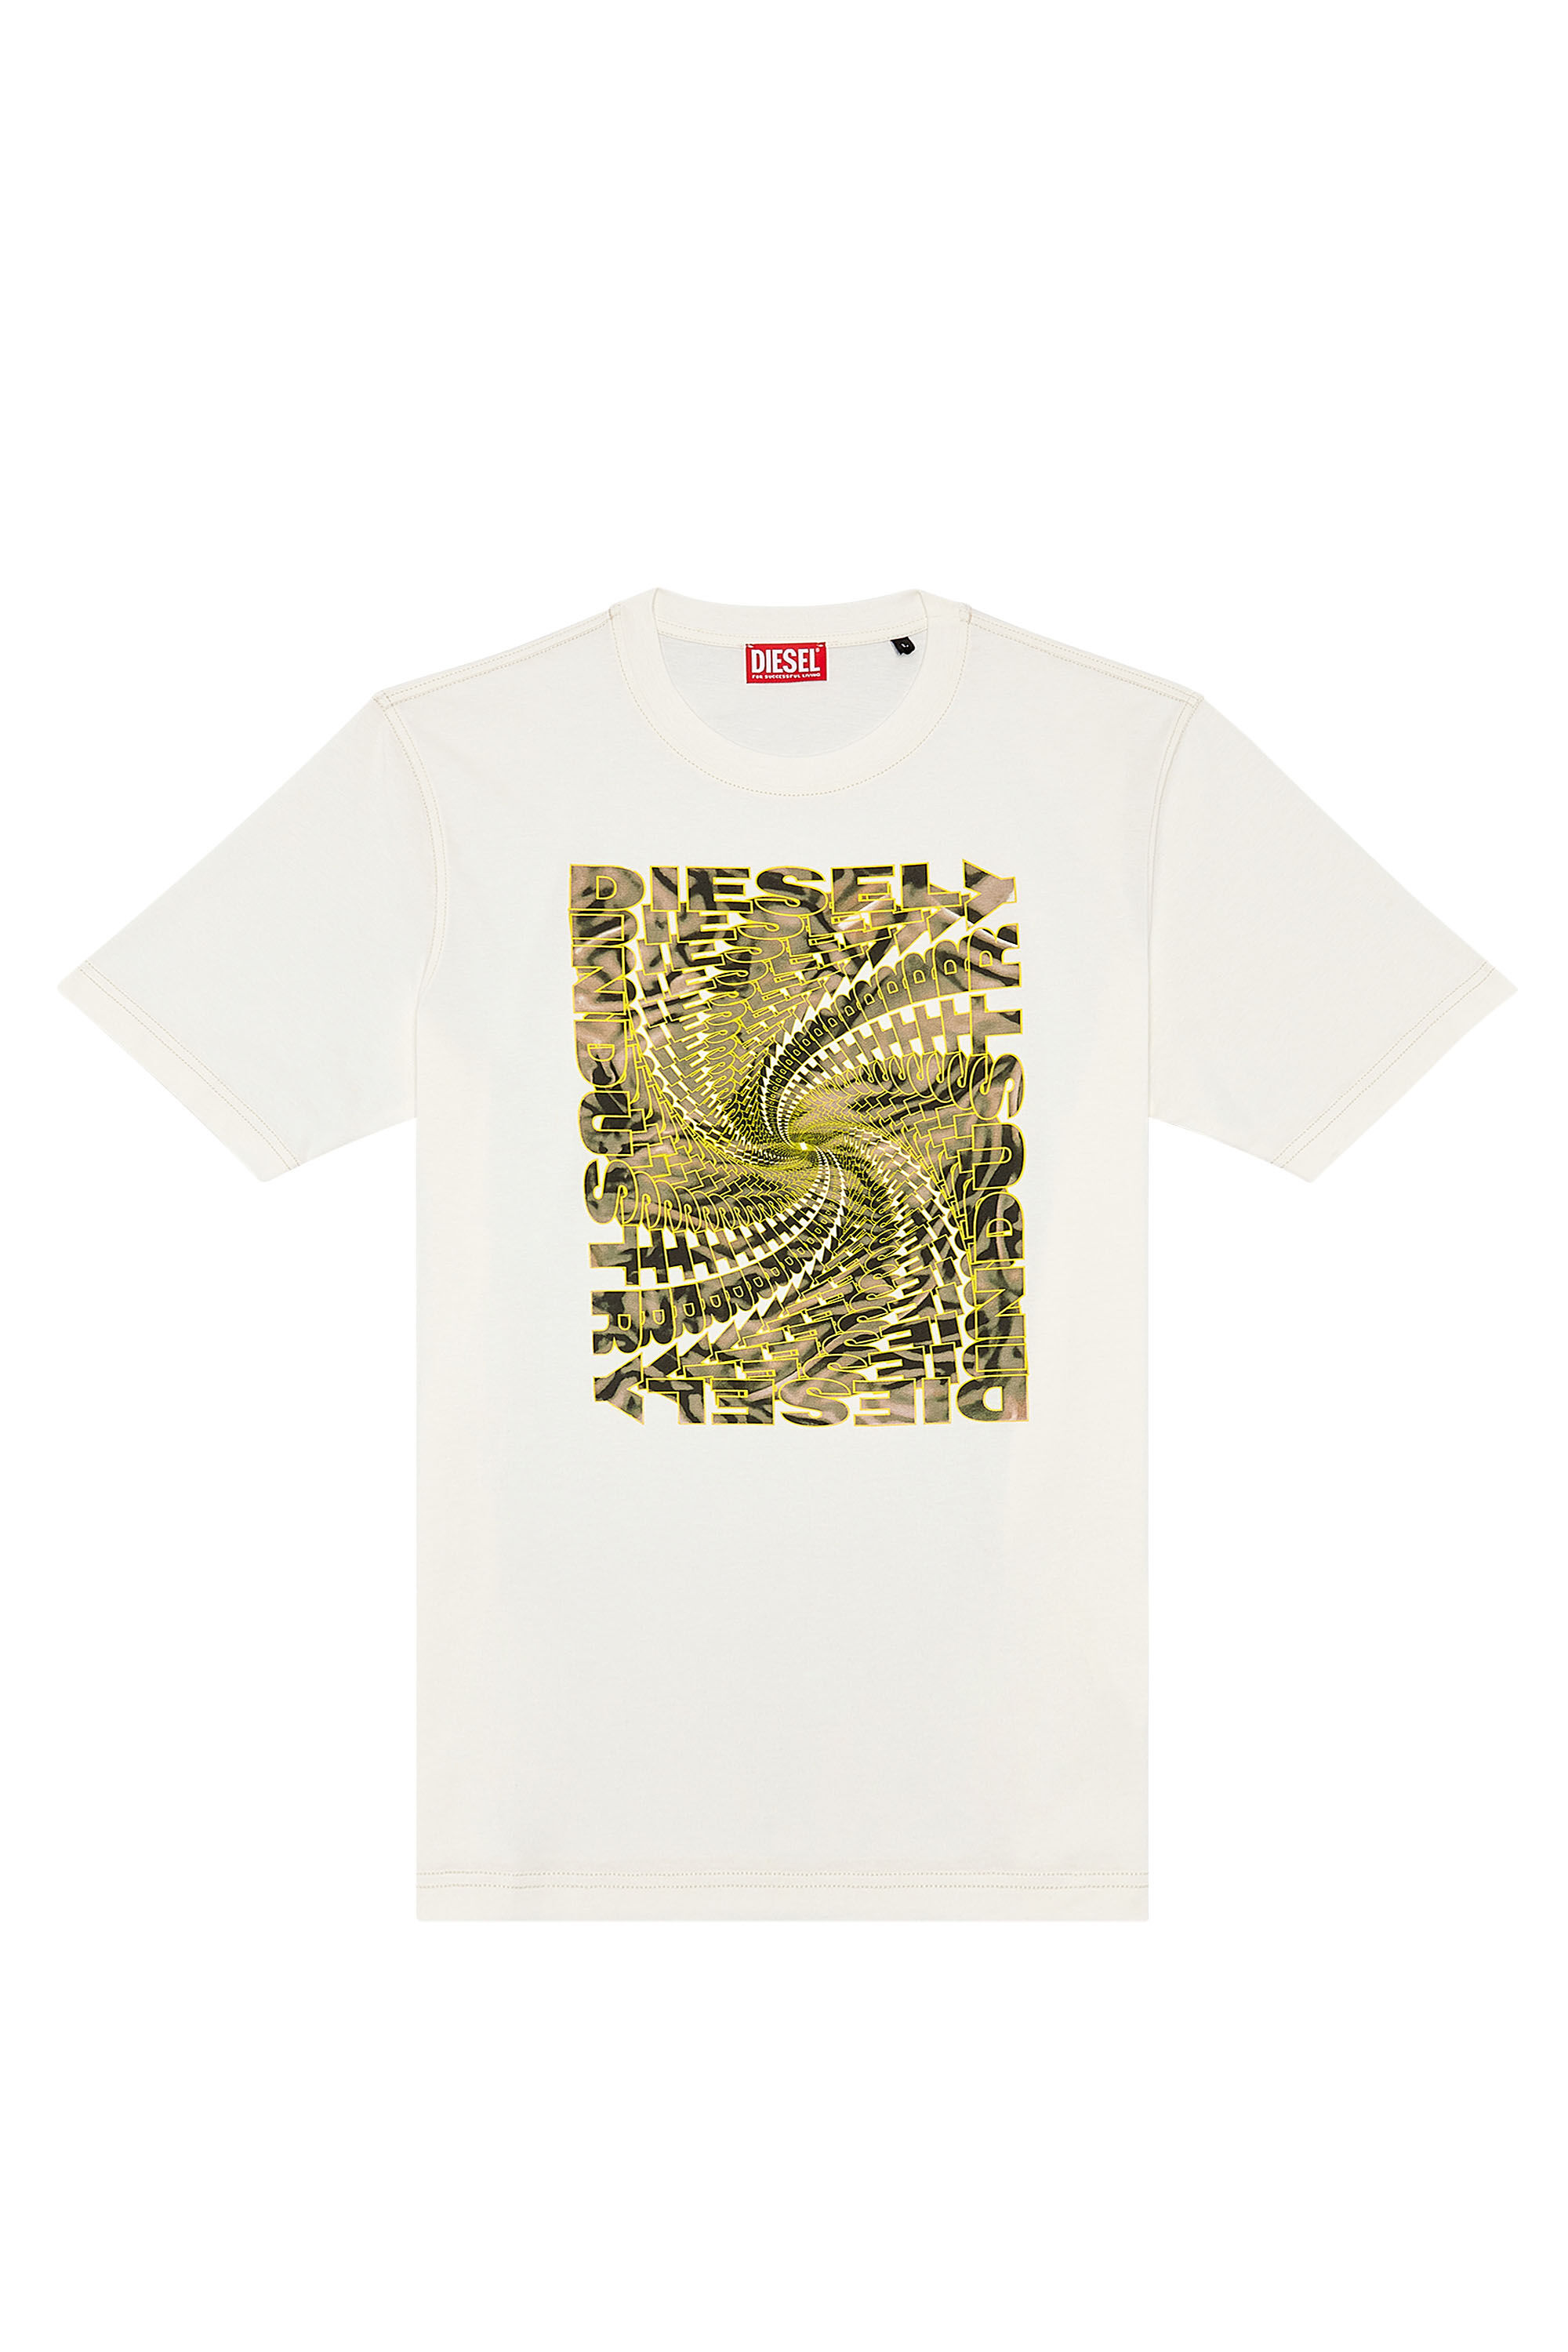 Diesel - T-JUST-N12, Man T-shirt with zebra-camo optical logo print in White - Image 2